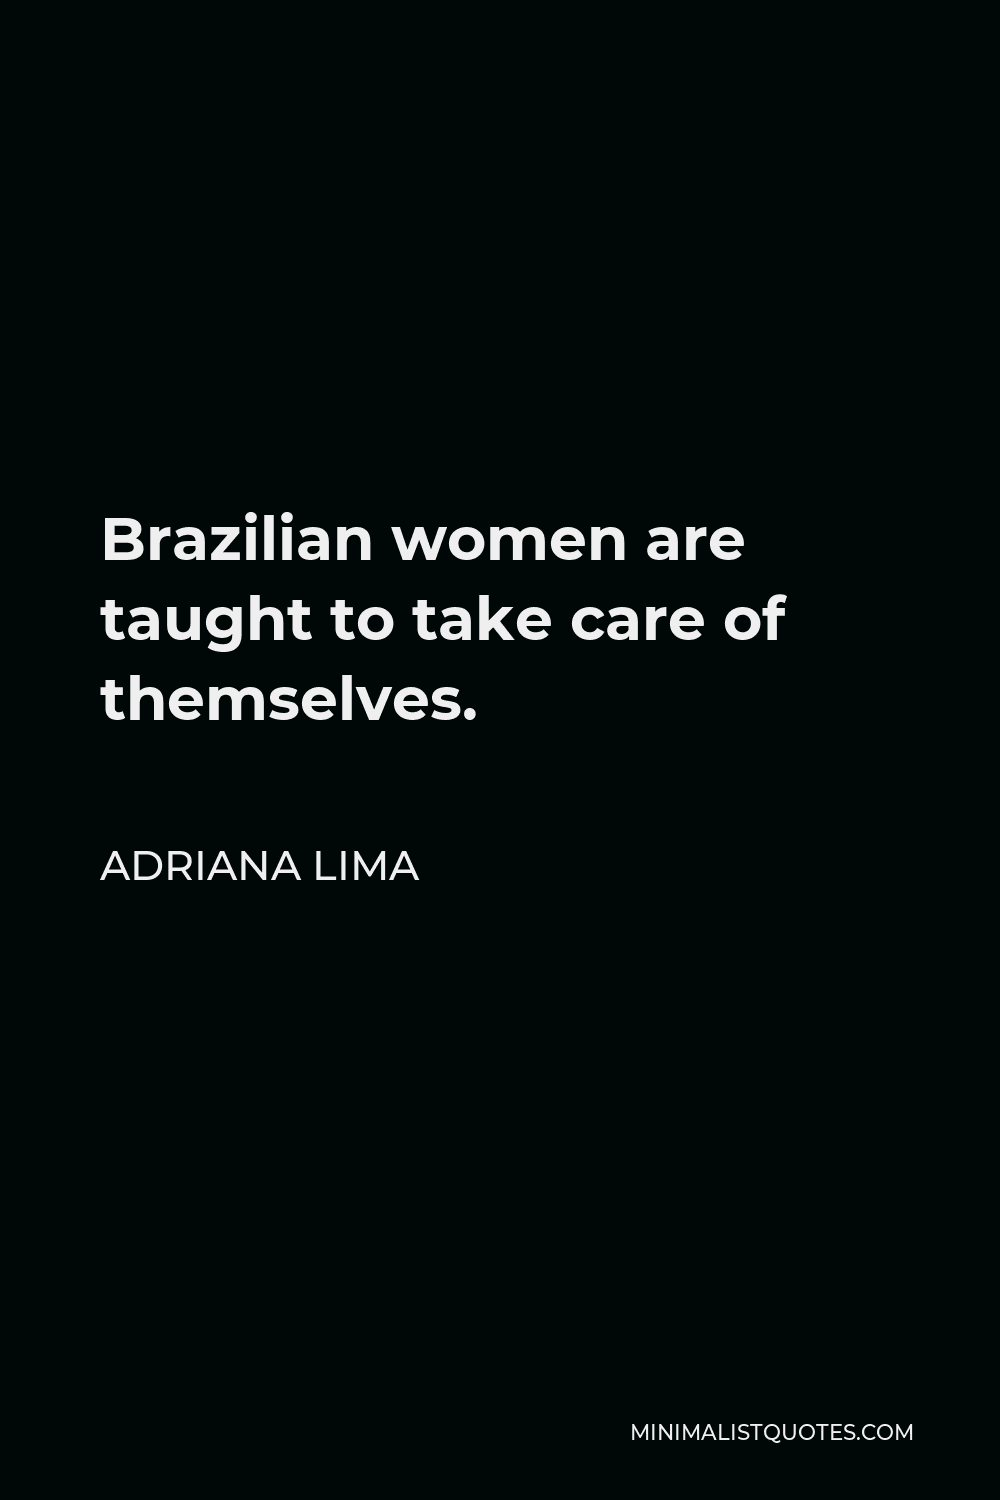 Adriana Lima Quote - Brazilian women are taught to take care of themselves.